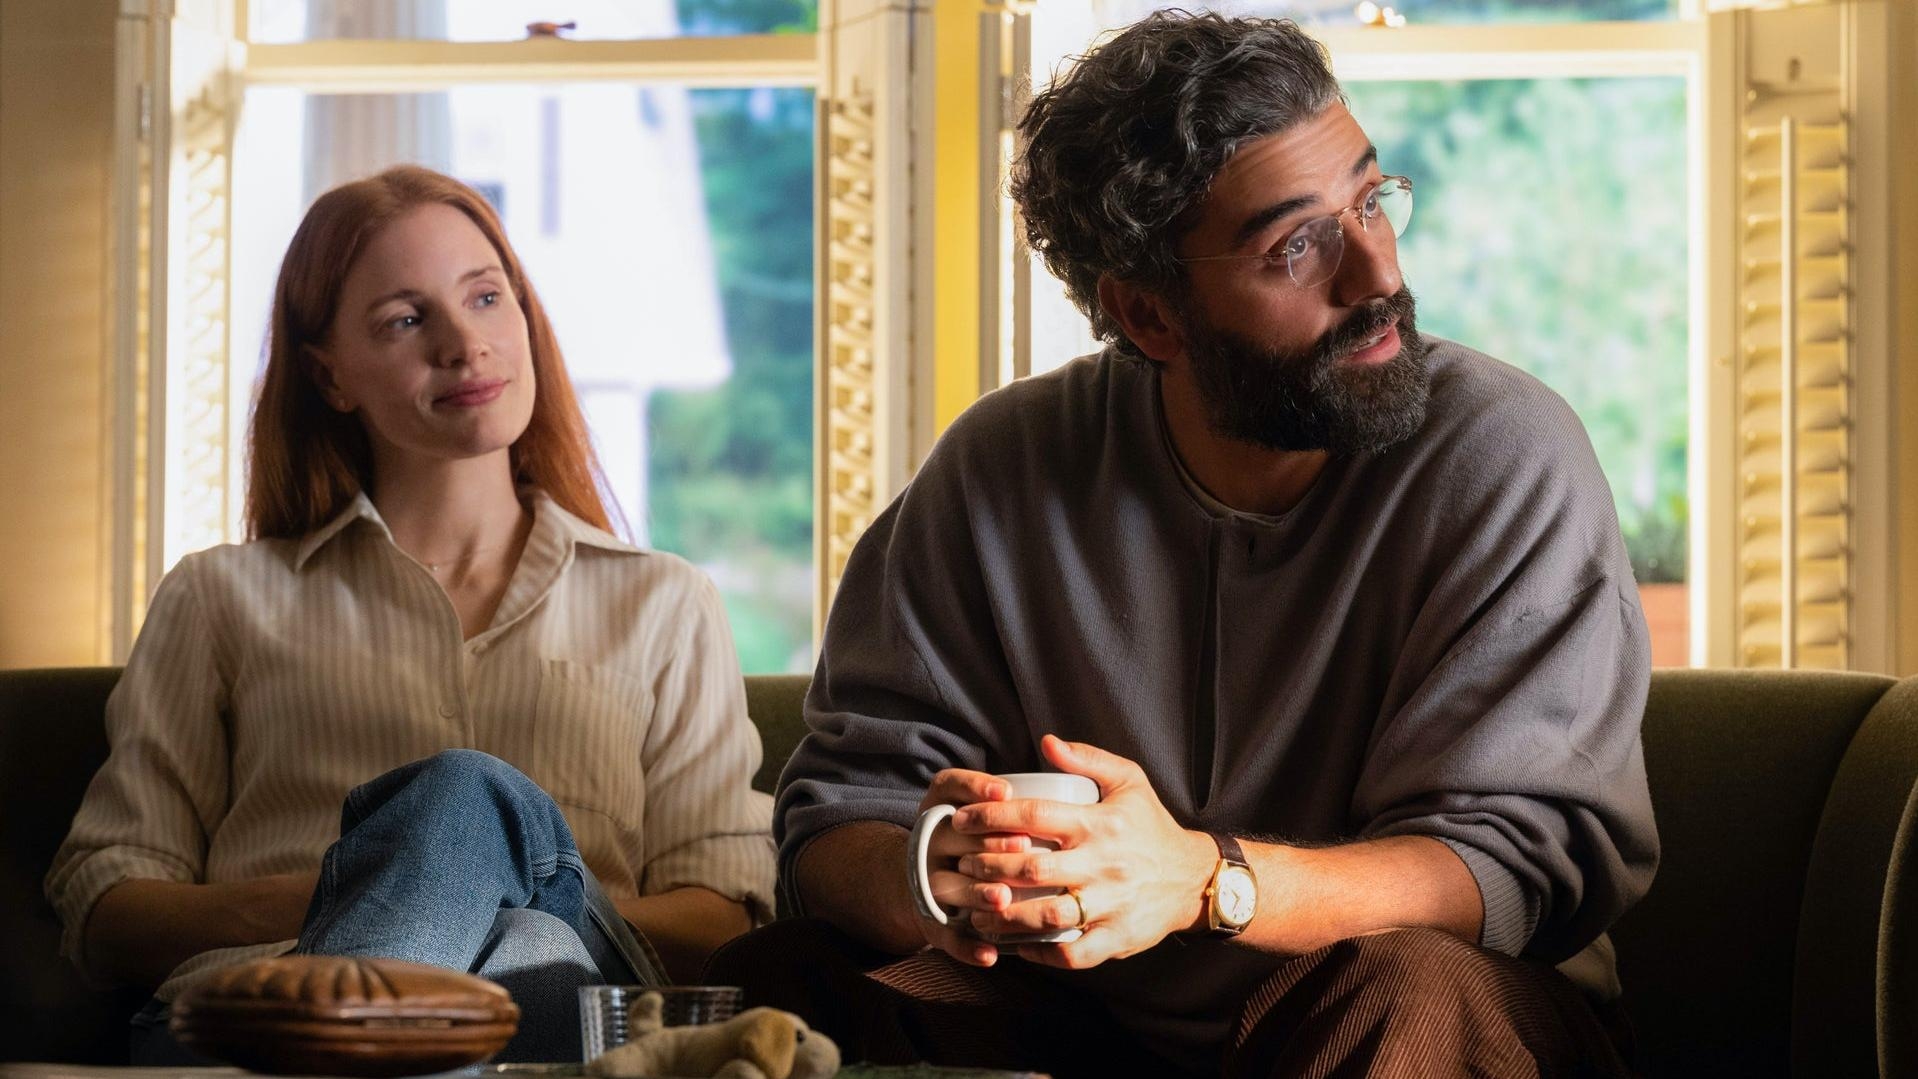 Watch Jessica Chastain and Oscar Isaac crumble in Scenes From A Marriage trailer